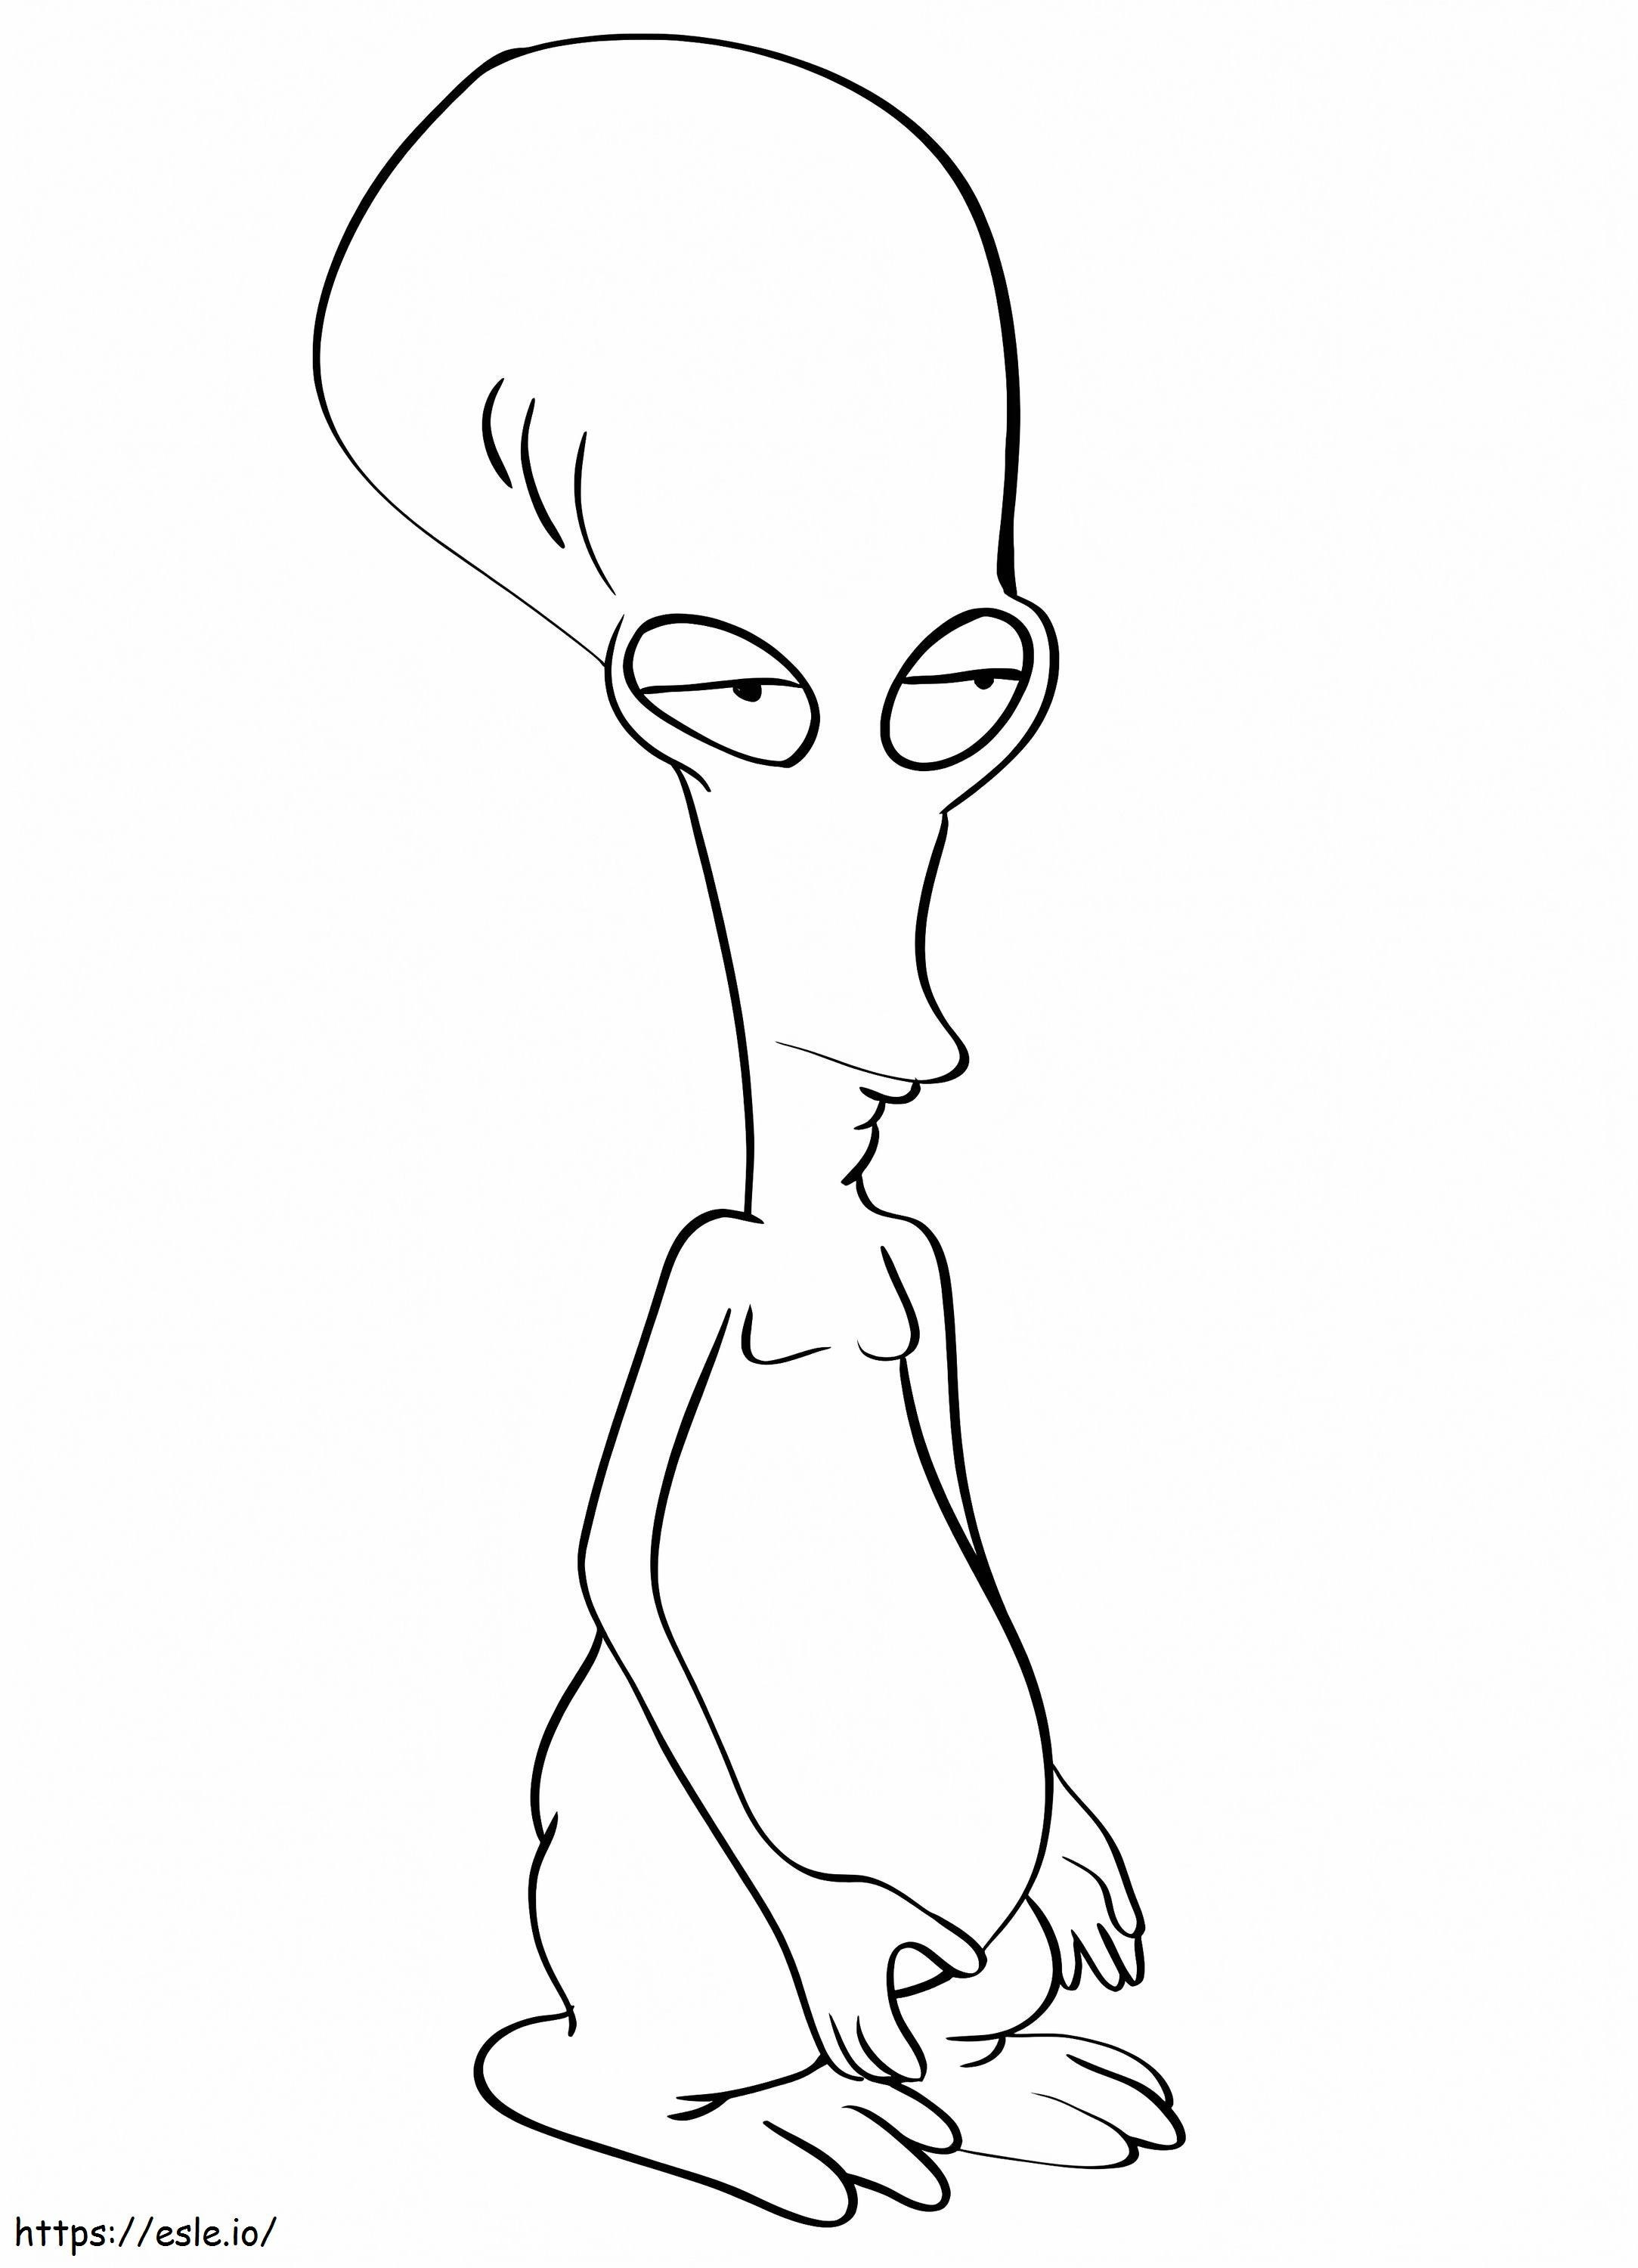 Alien Roger Smith coloring page